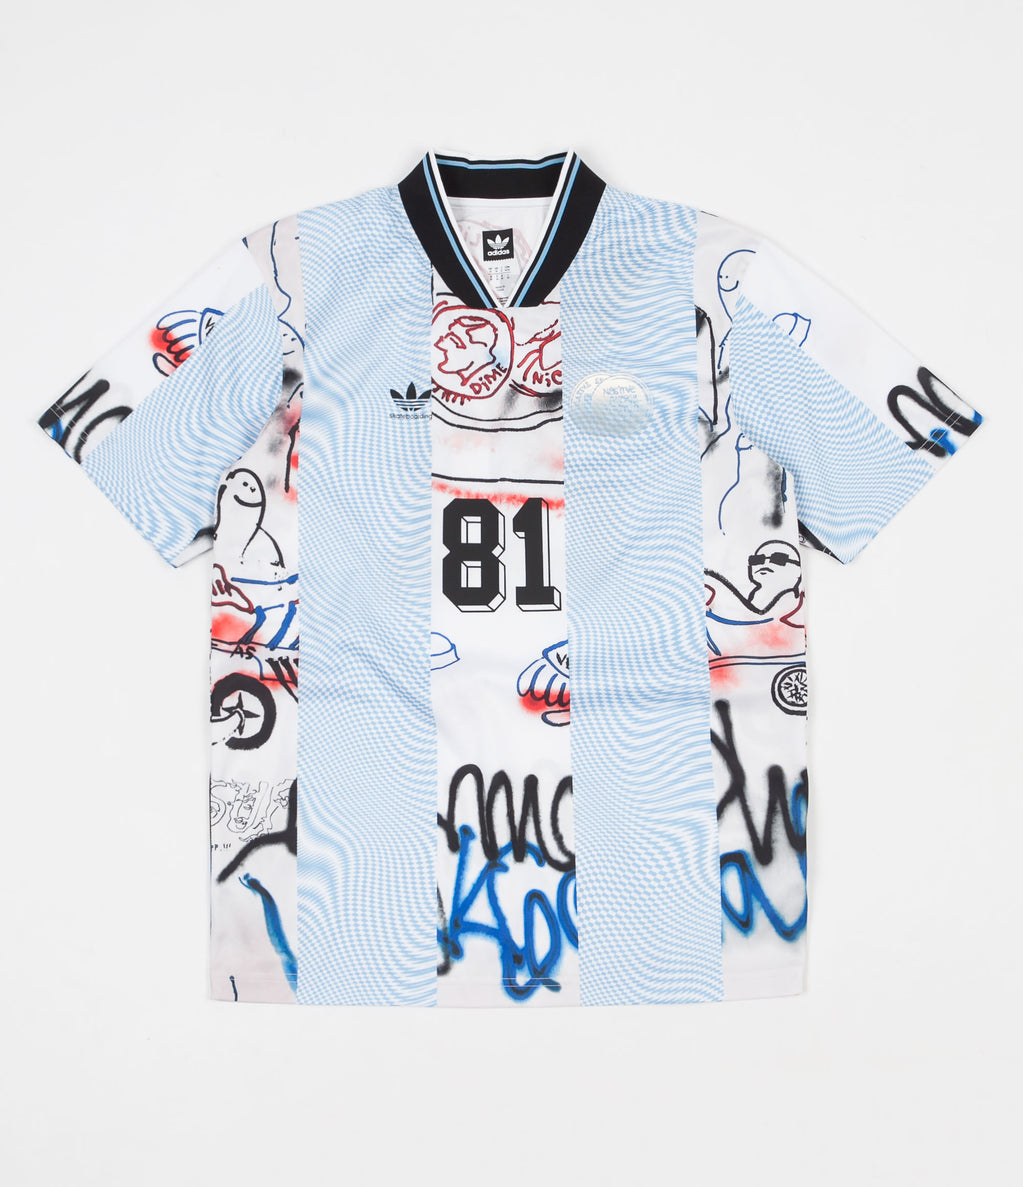 Adidas Gonzales Jersey - Black / White / Clear Blue / Multicolour ...